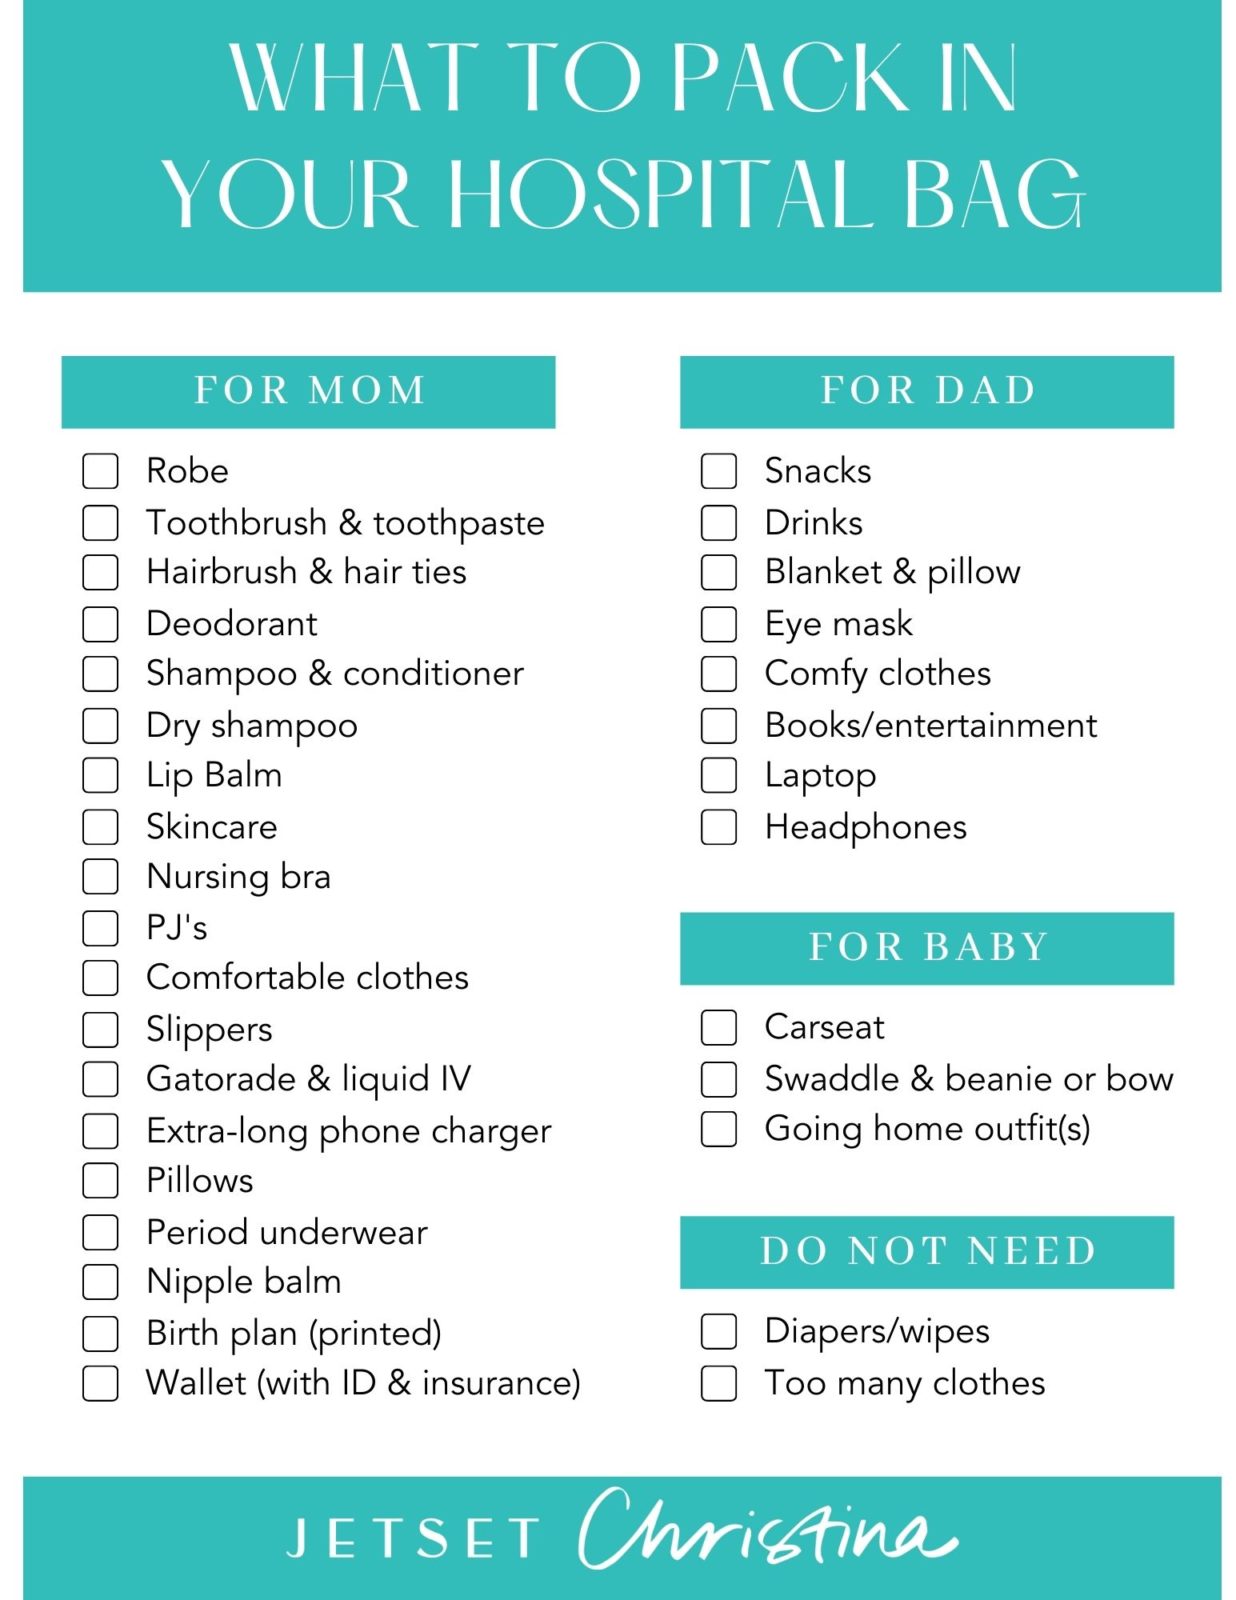 https://www.jetsetchristina.com/wp-content/uploads/2022/04/Jetset-Christina-hospital-packing-list-pregnancy-prep-for-baby-What-to-Pack-in-Your-Hospital-Bag-scaled.jpg